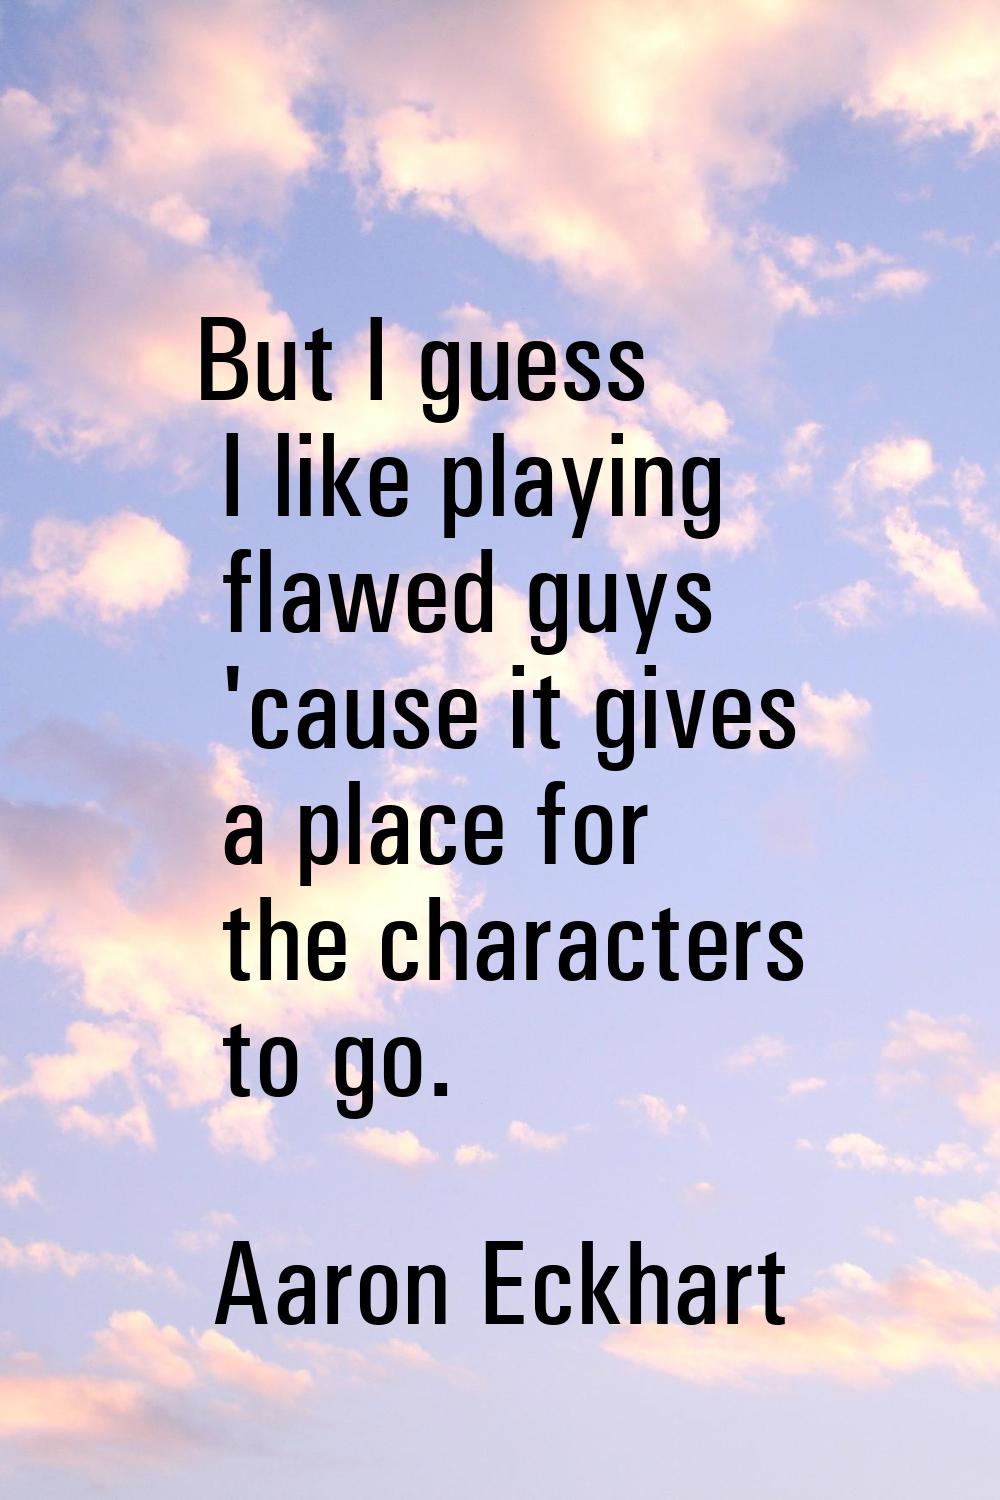 But I guess I like playing flawed guys 'cause it gives a place for the characters to go.